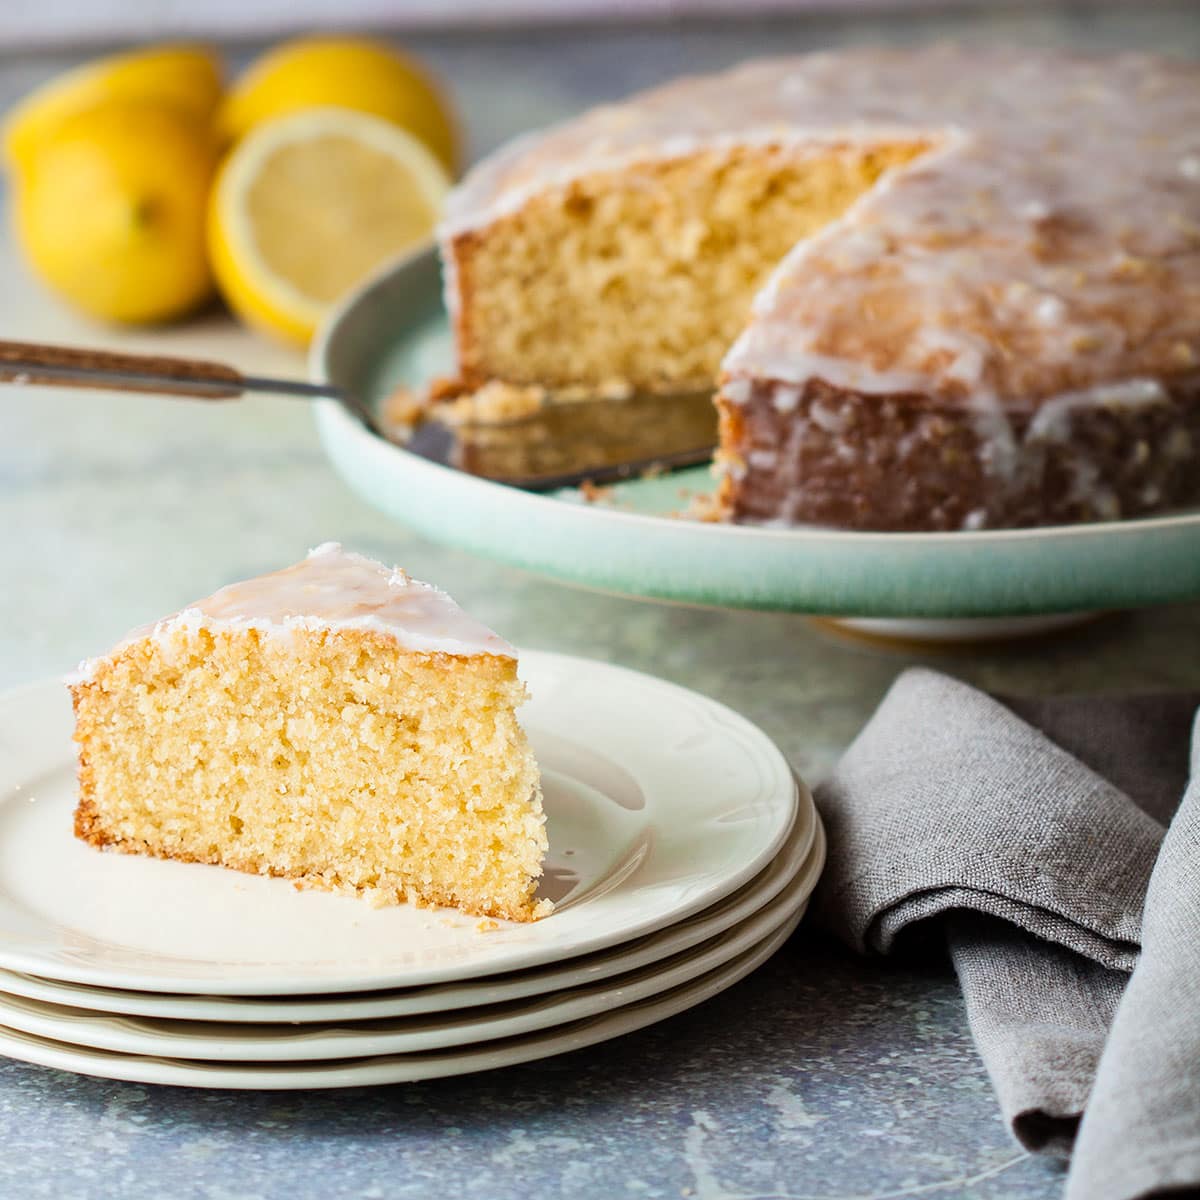 slice of lemon drizzle olive oil cake on a plate with remaining cake behind.